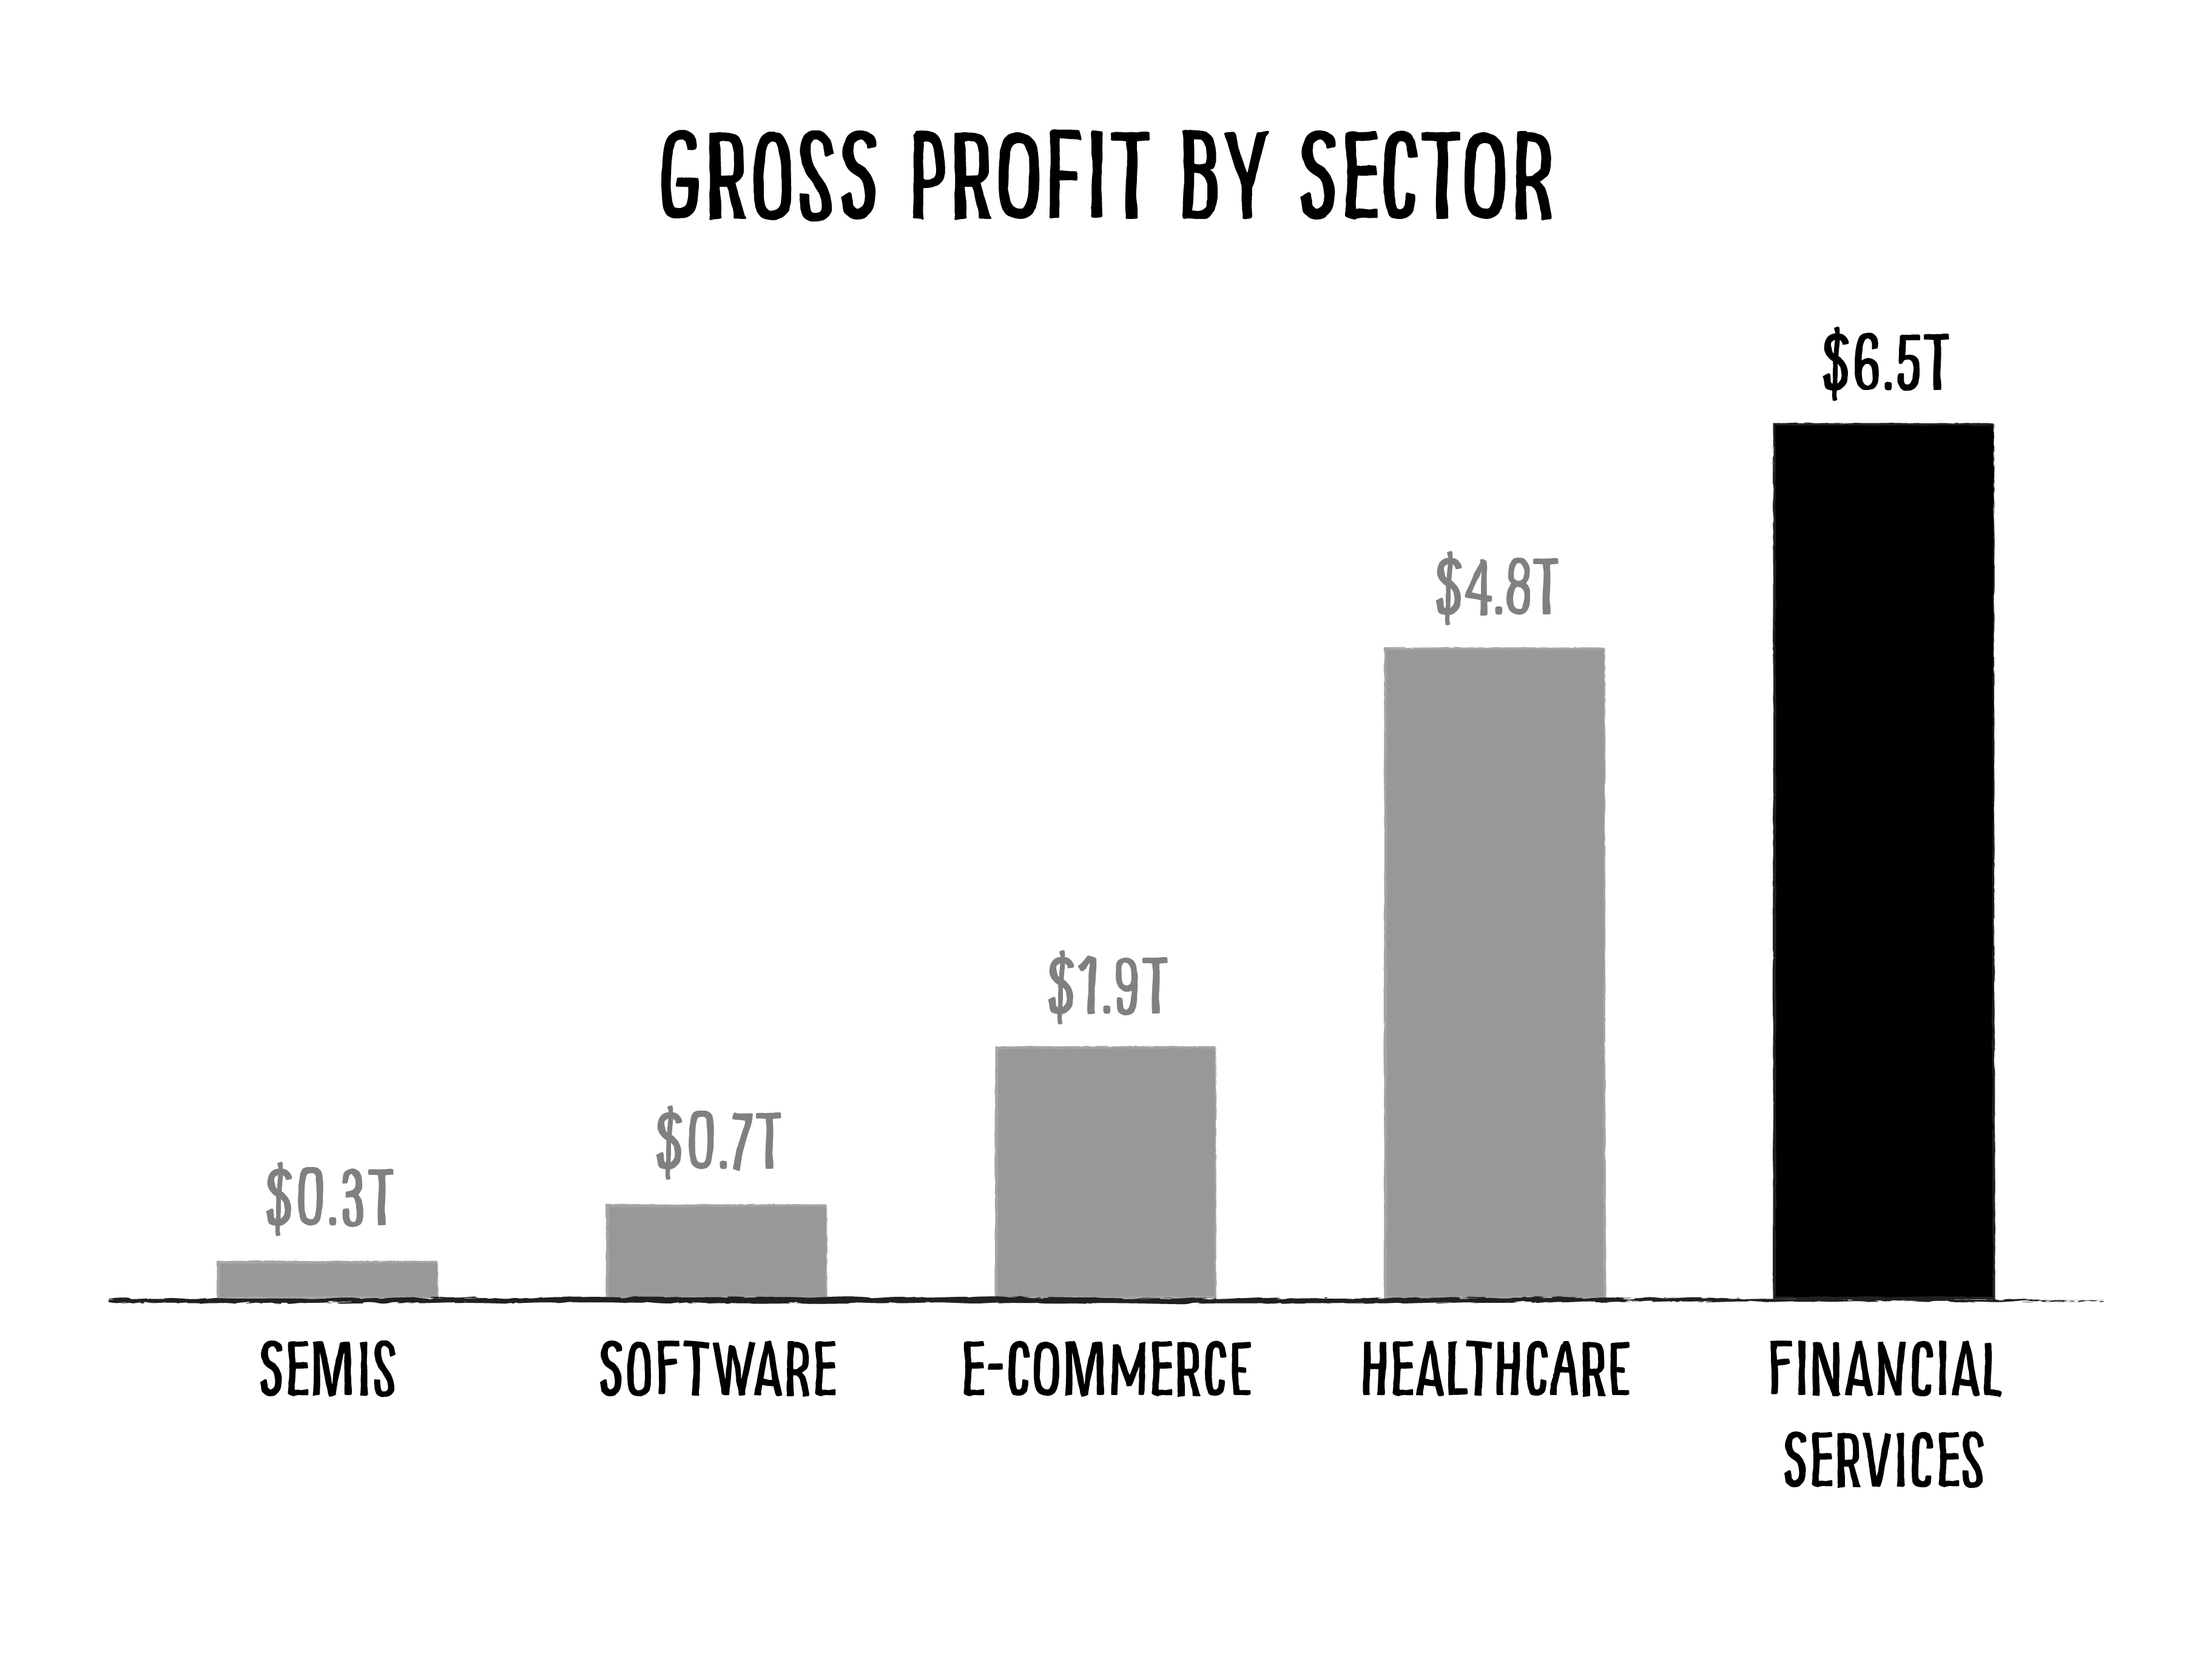 Gross profit by sector